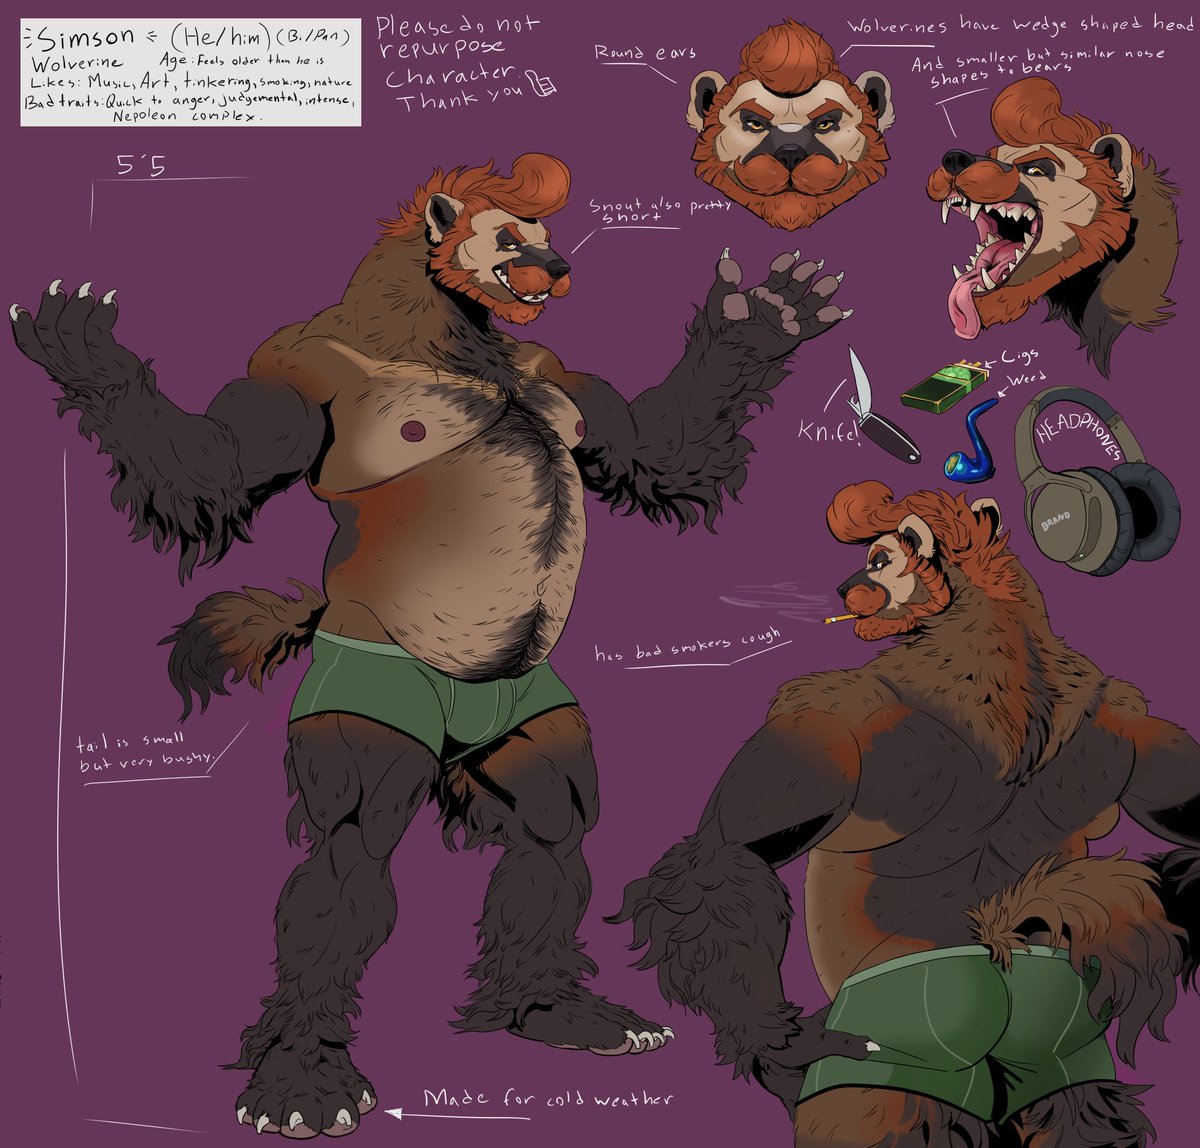 Fursona reference sheet update. Please don't repost or reuse character.